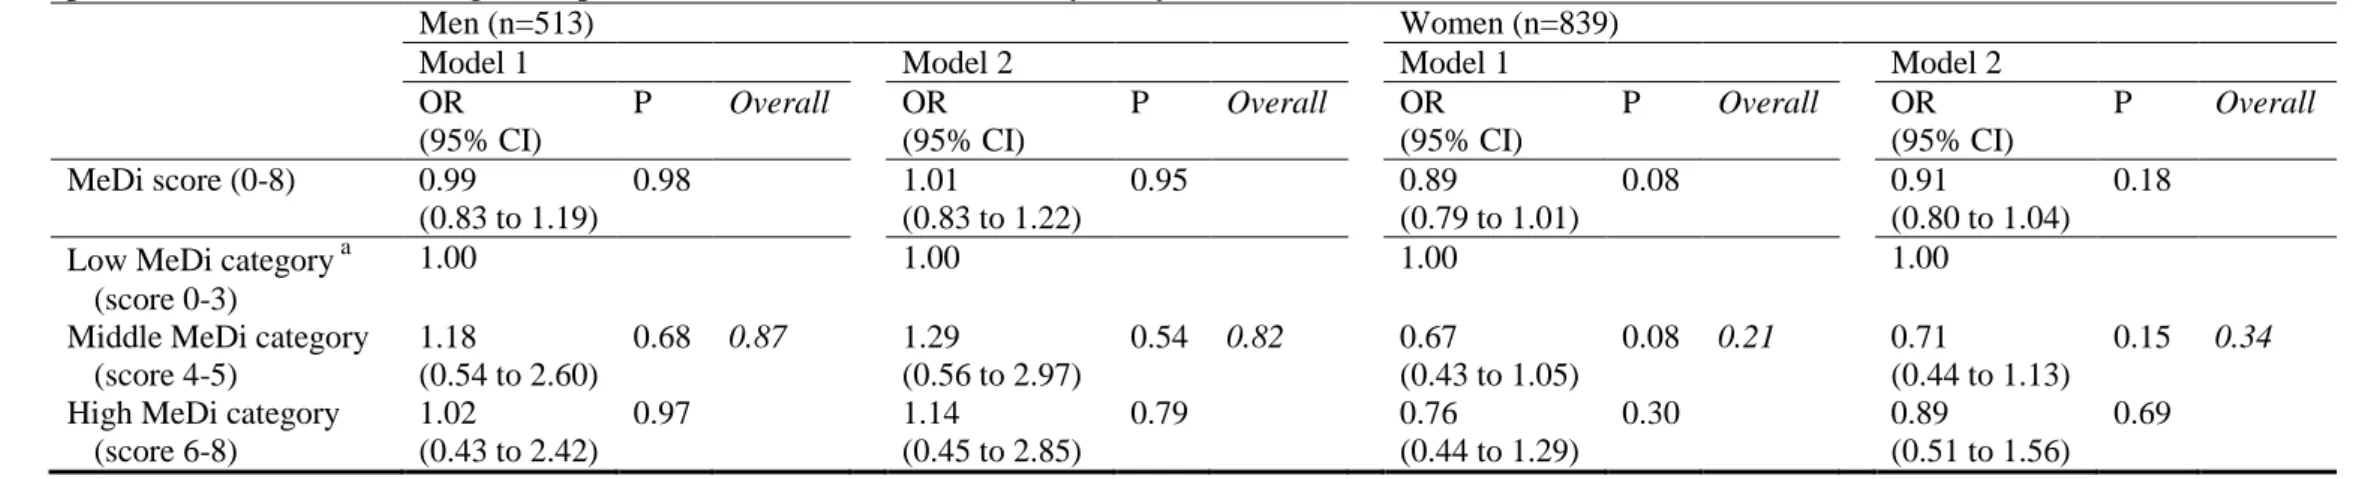 Table 3. Association between Mediterranean Diet adherence and baseline disability in basic or instrumental ADL stratified by gender and adjusted for  potential confounders among older persons, Bordeaux, The Three-City study, 2001-2002 